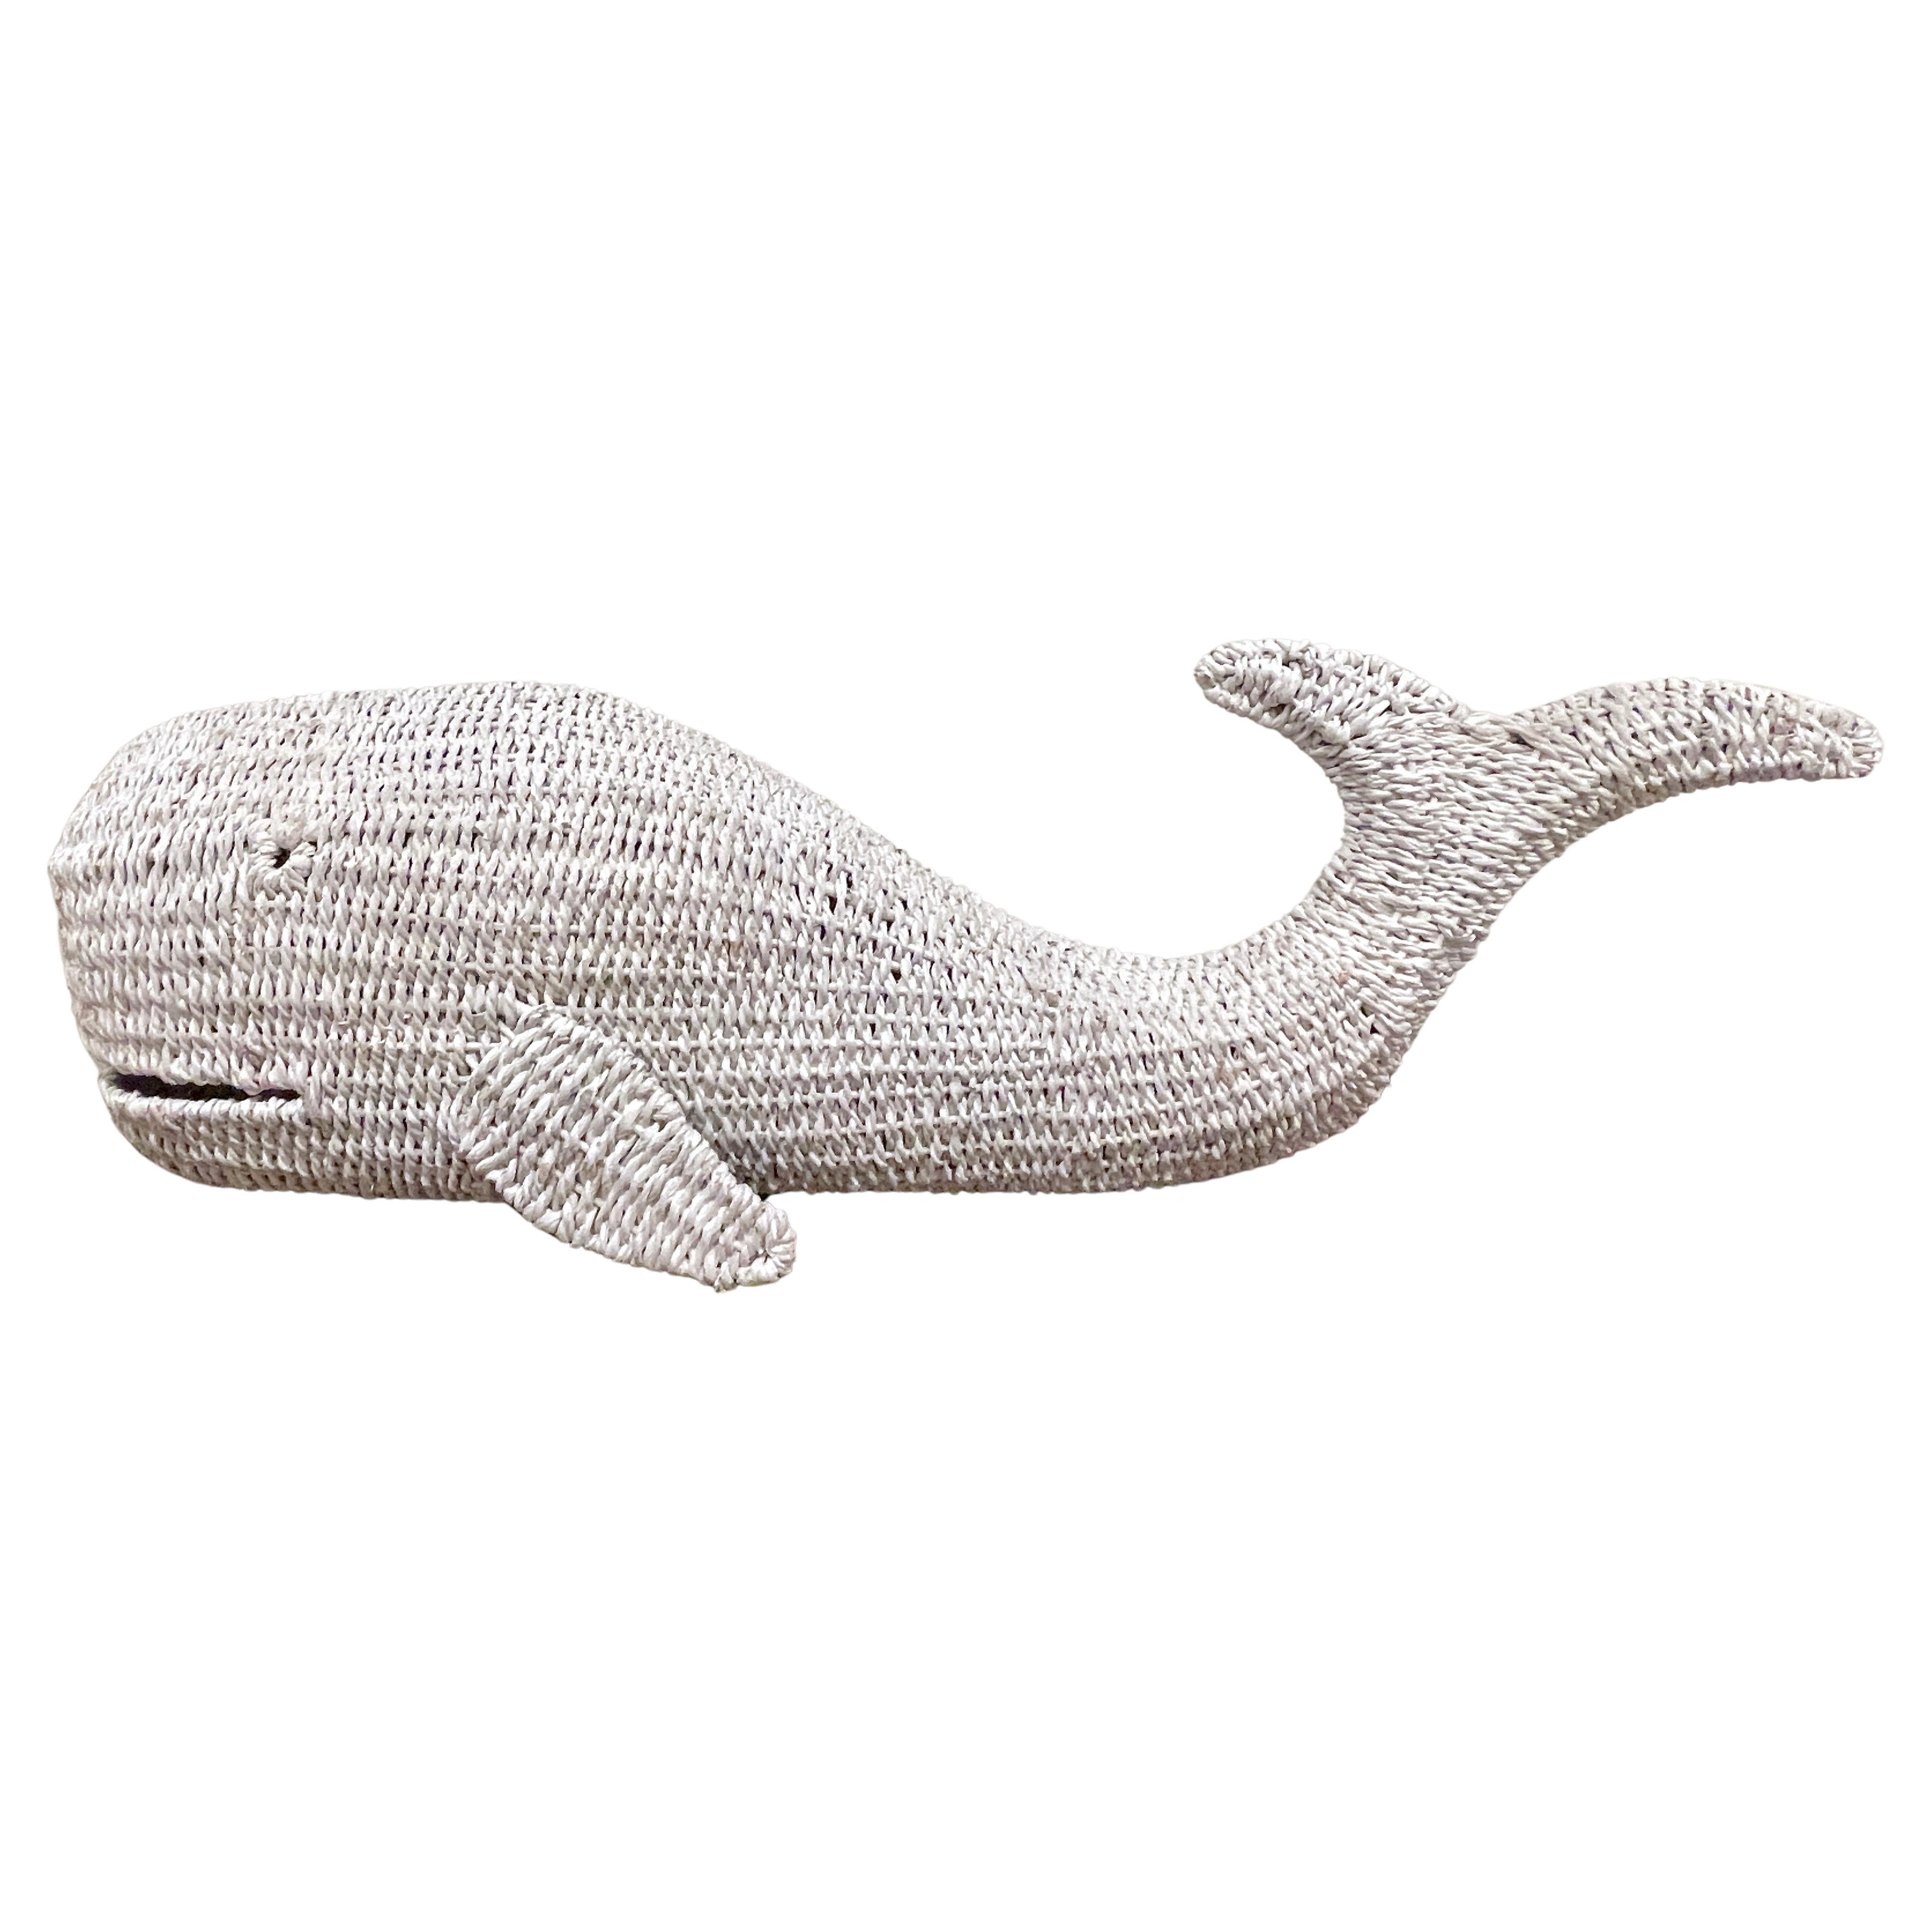 1970s Vintage  'Nantucket' White Wicker Sculpture of a Whale  For Sale